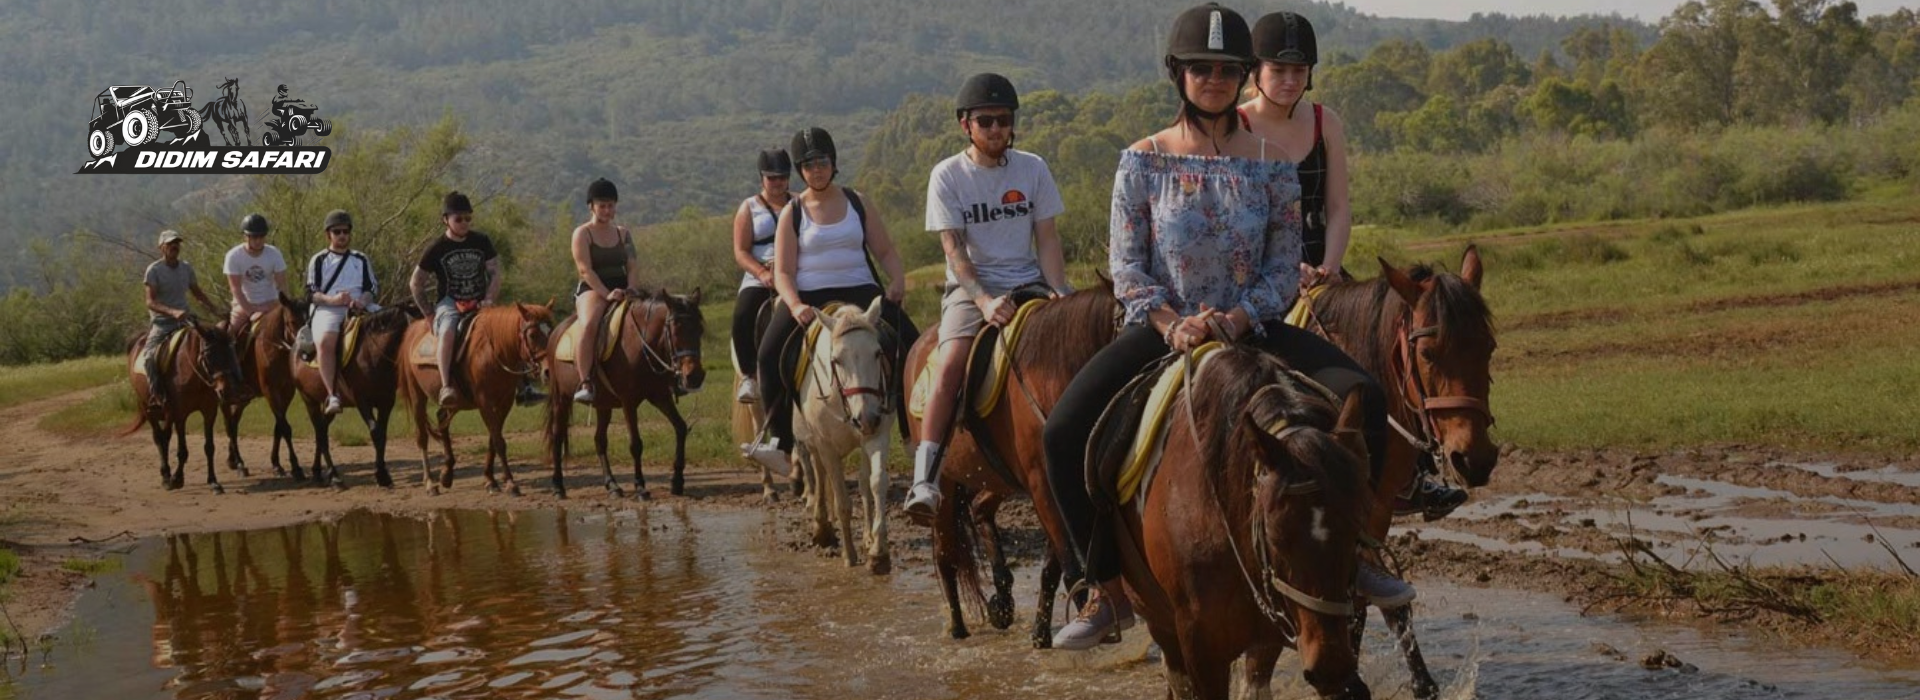 Join one of nature’s most majestic creatures to explore the surrounding landscapes of Didim on a horse safari.